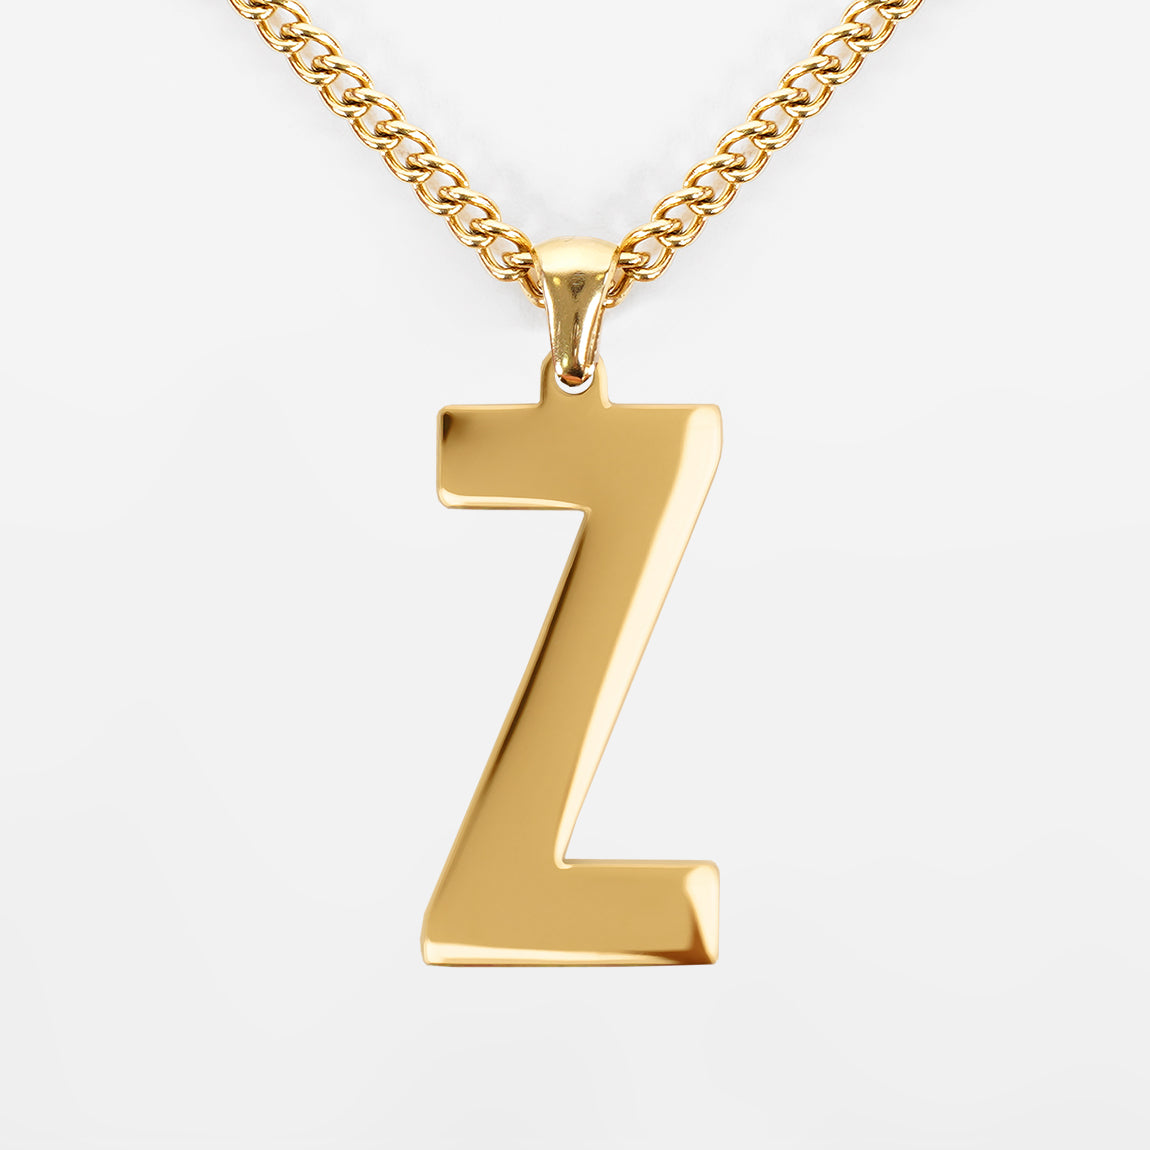 Z Letter Pendant with Chain Necklace - Gold Plated Stainless Steel